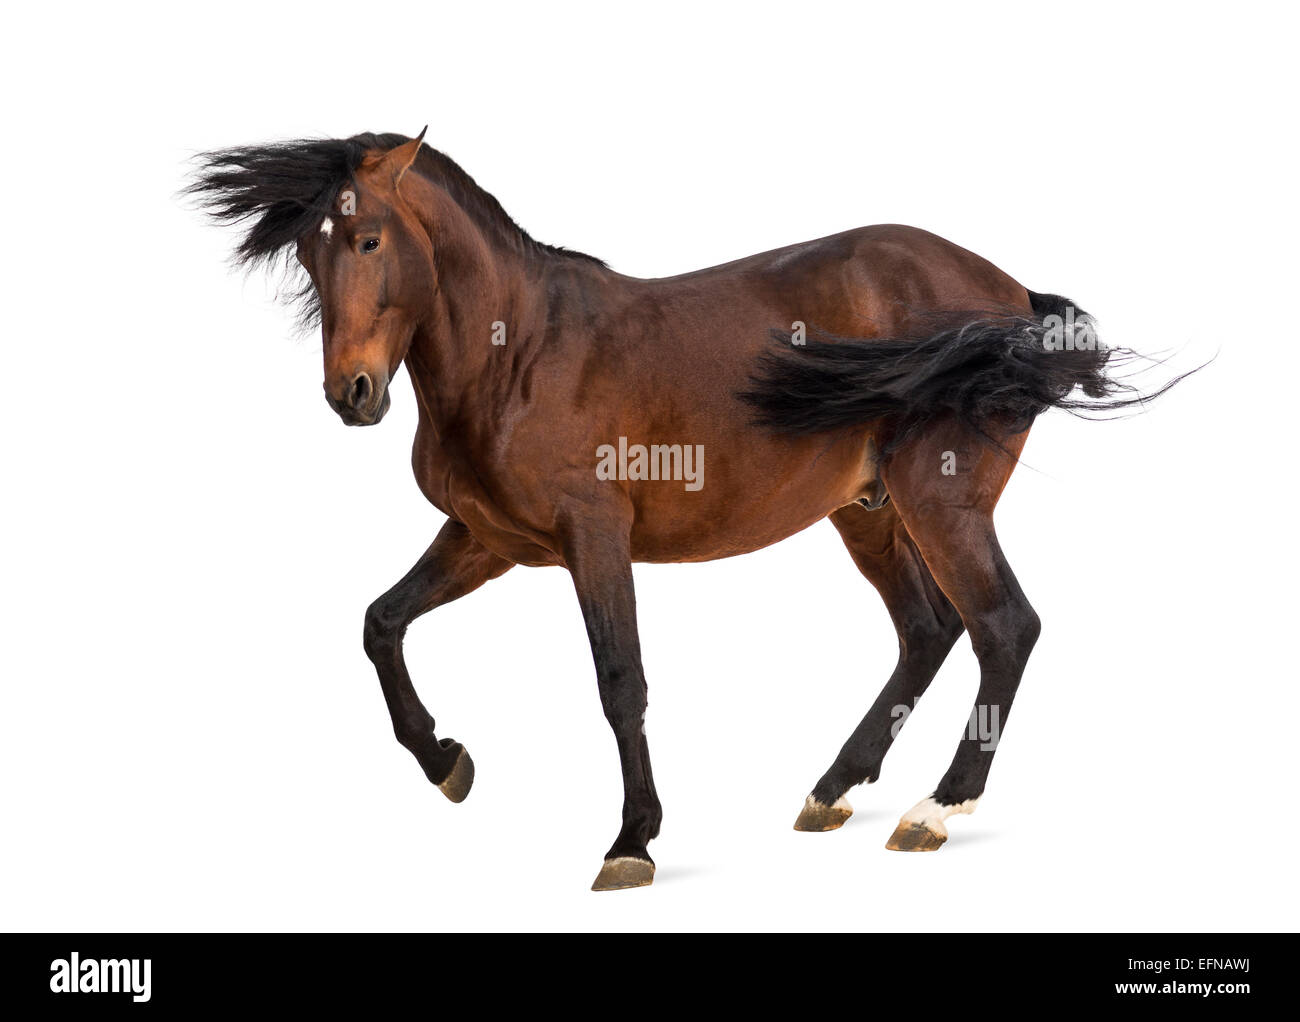 Cheval andalou trotting against white background Banque D'Images